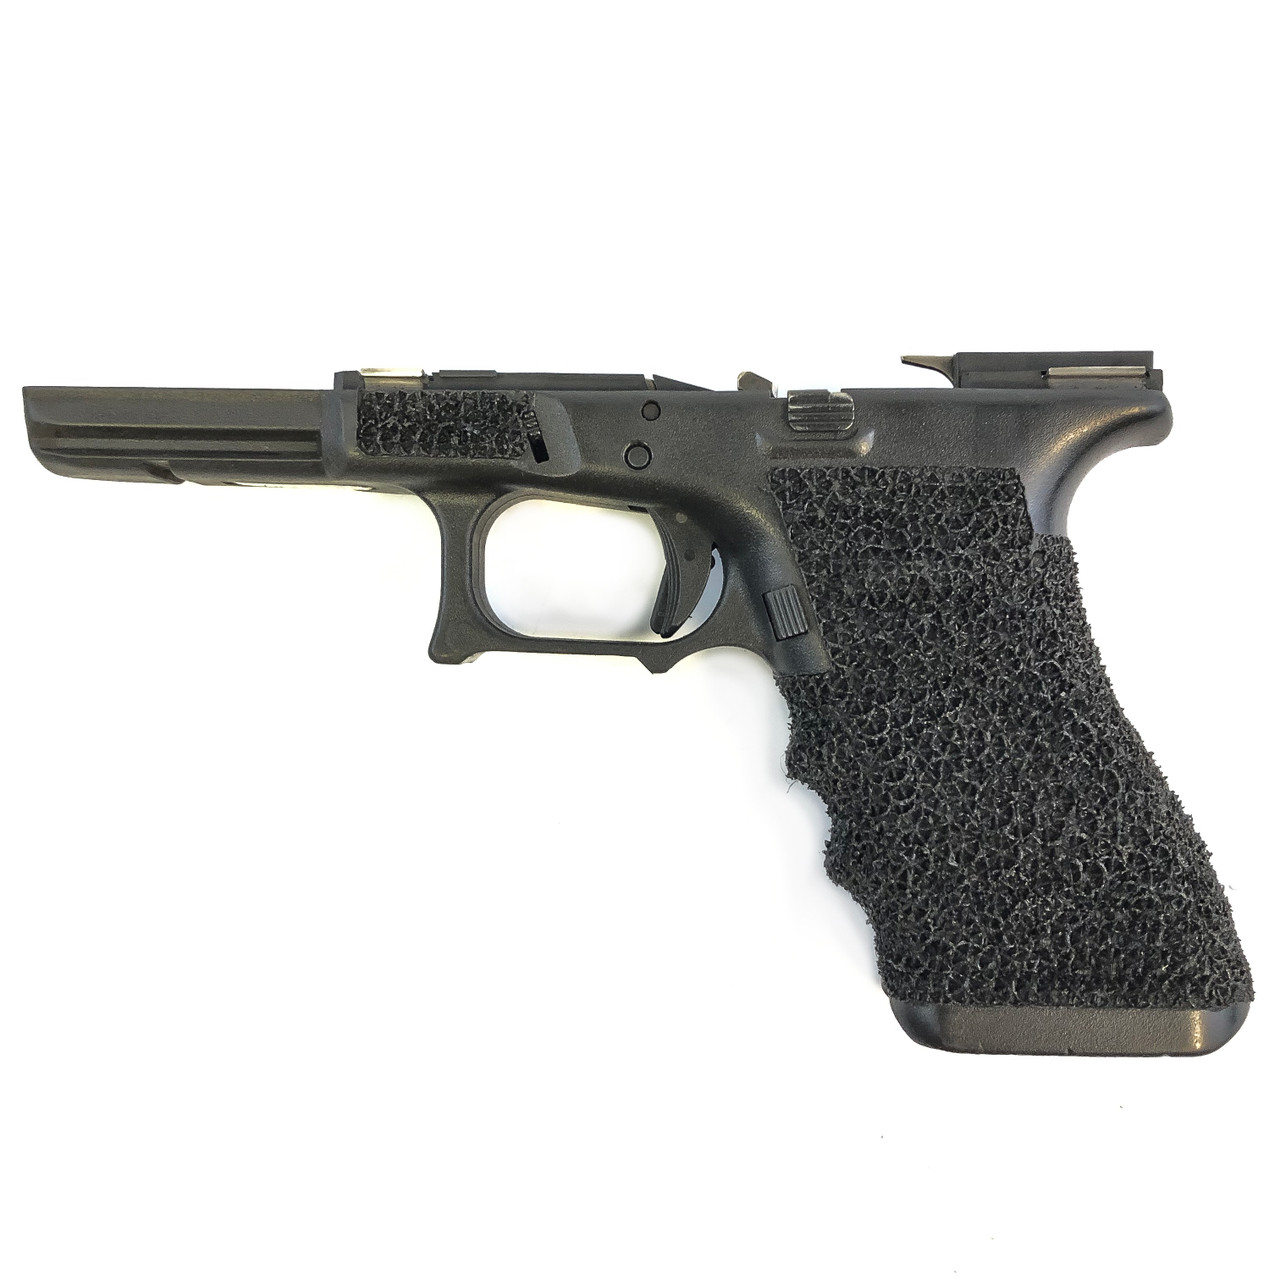 Grip Stippling - Competition Texture 360 - Pro 2 Customs